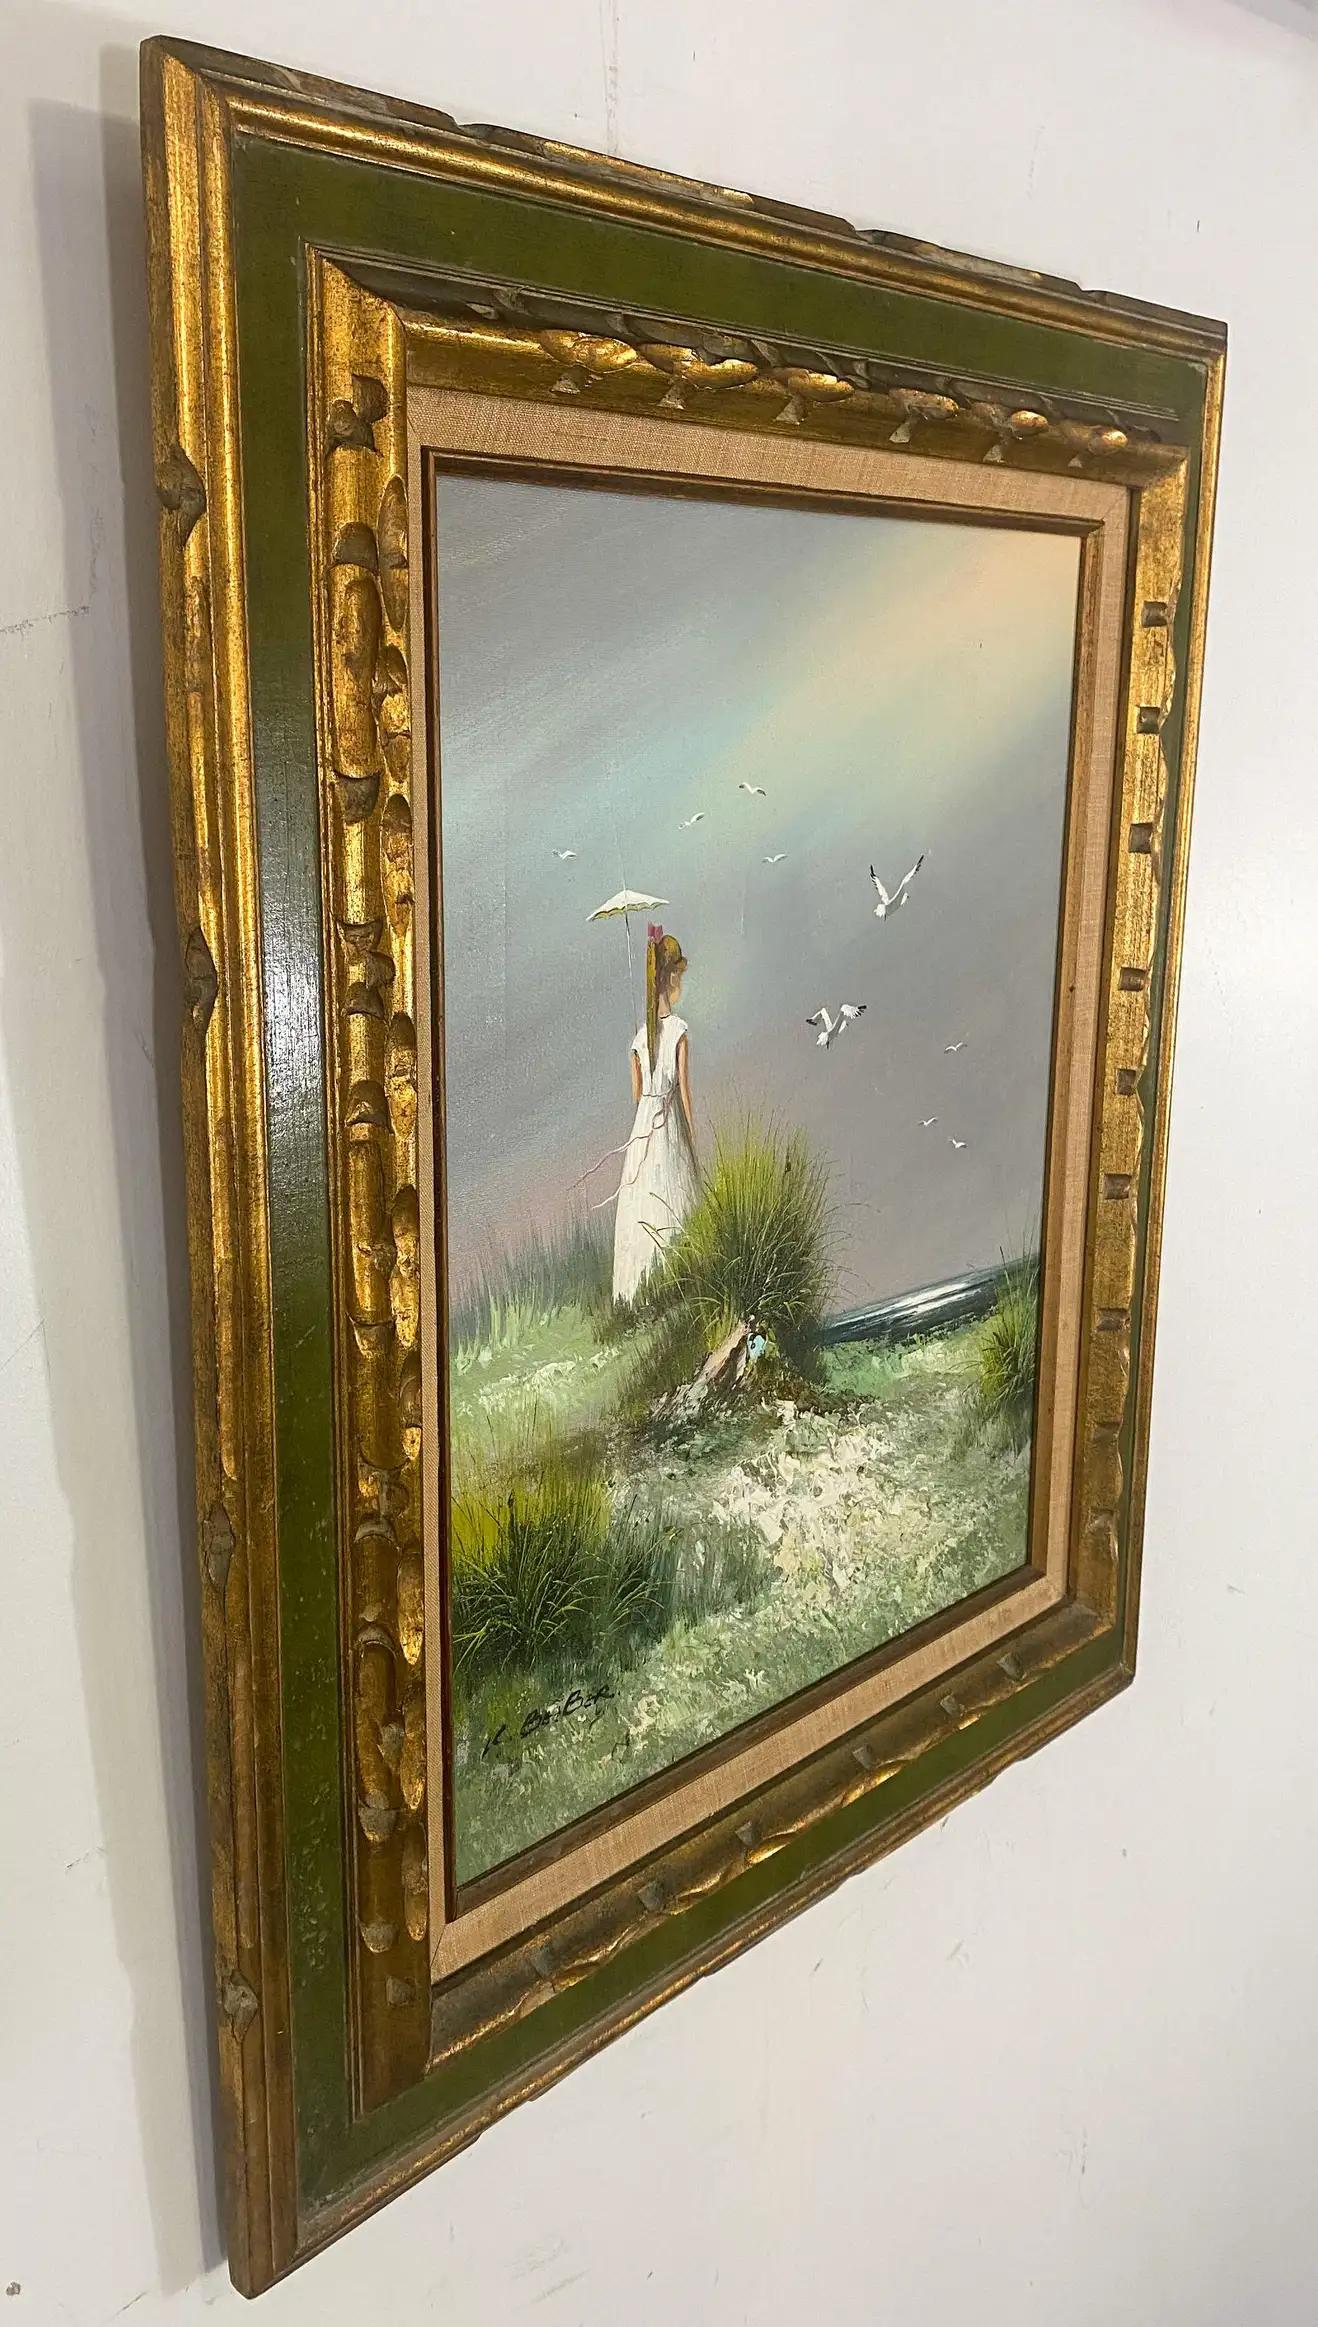 Impressionistic Seascape Oil on Canvas Painting of a Lady and Seagulls - Brown Landscape Painting by Unknown